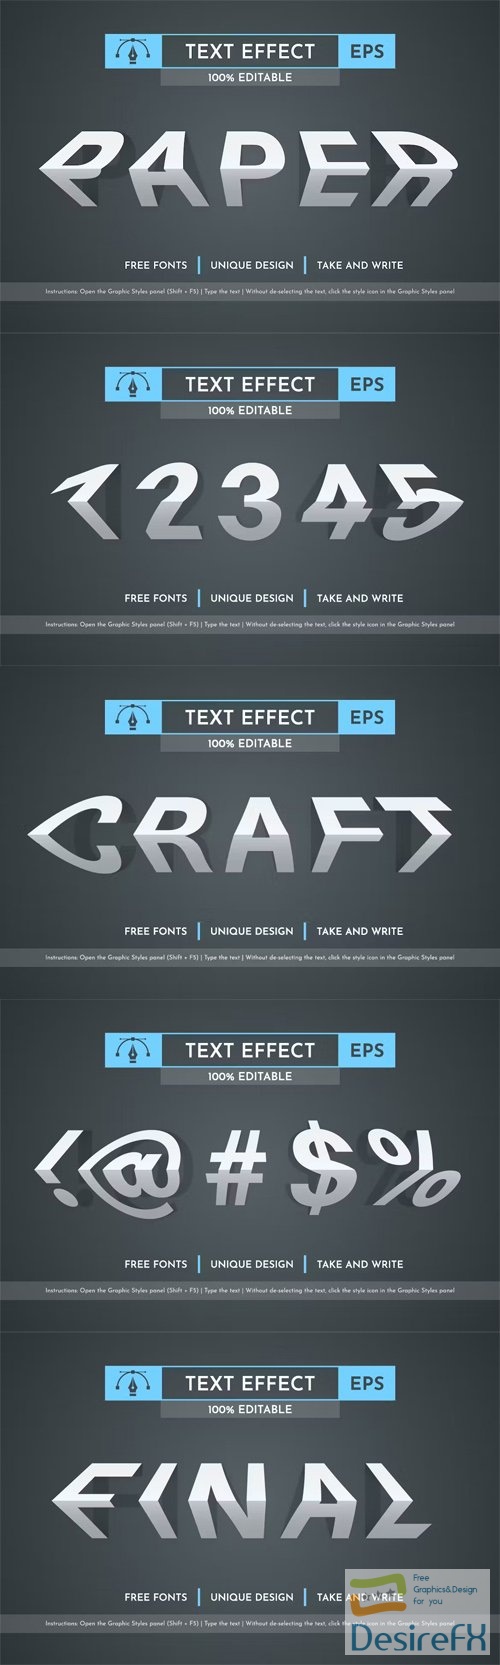 Folded Paper - Editable Text Effect, Font Style for Illustrator